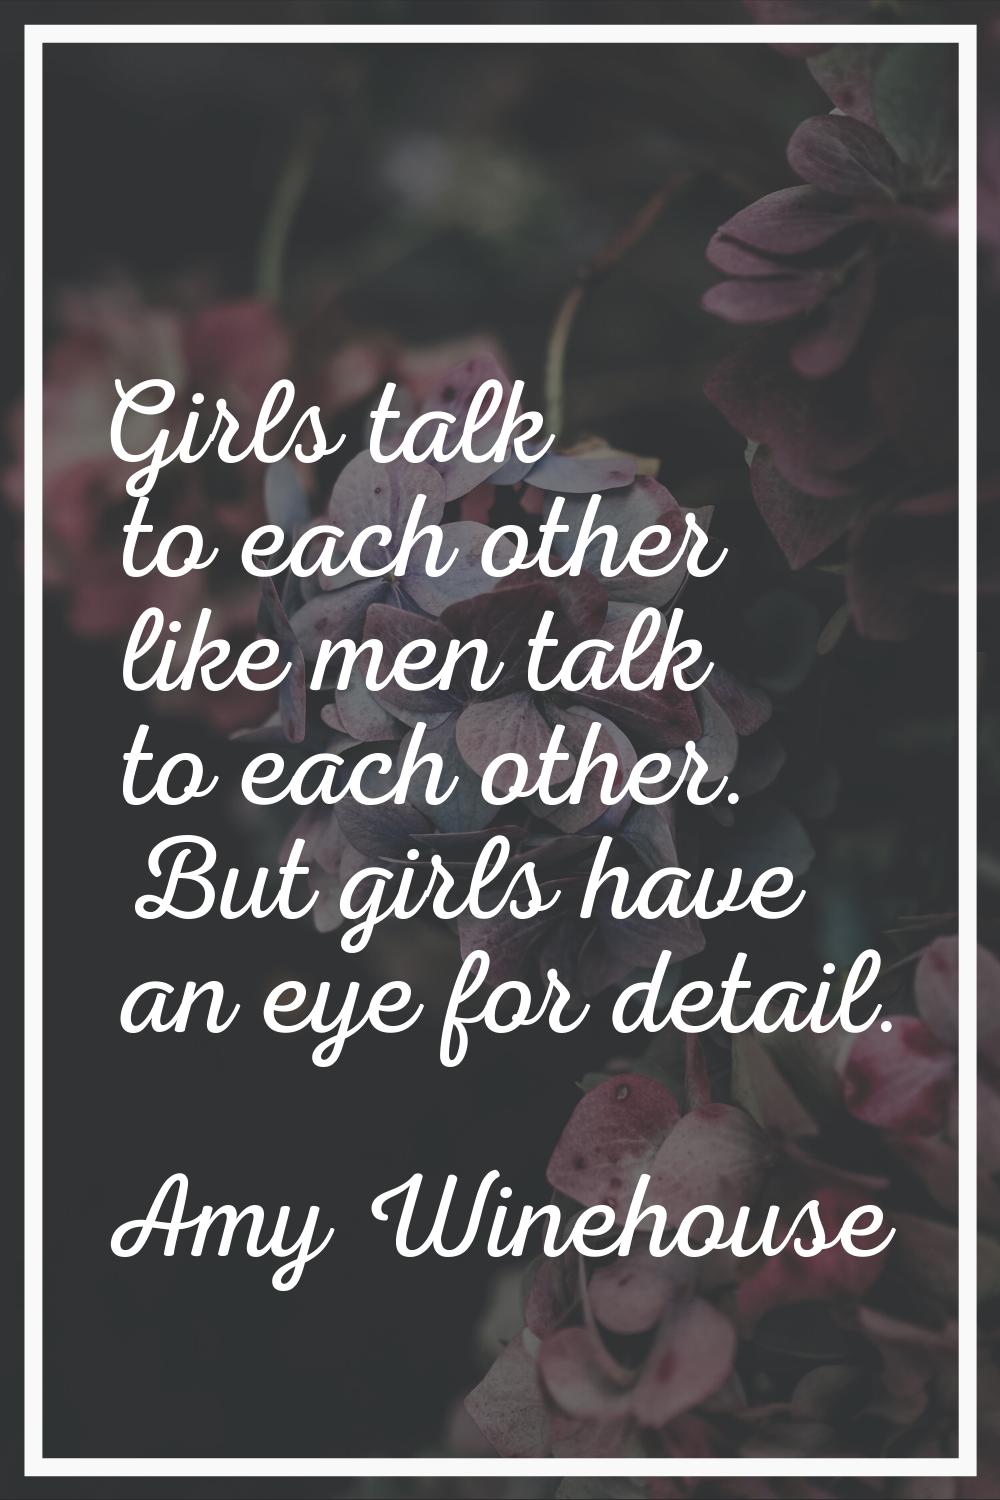 Girls talk to each other like men talk to each other. But girls have an eye for detail.